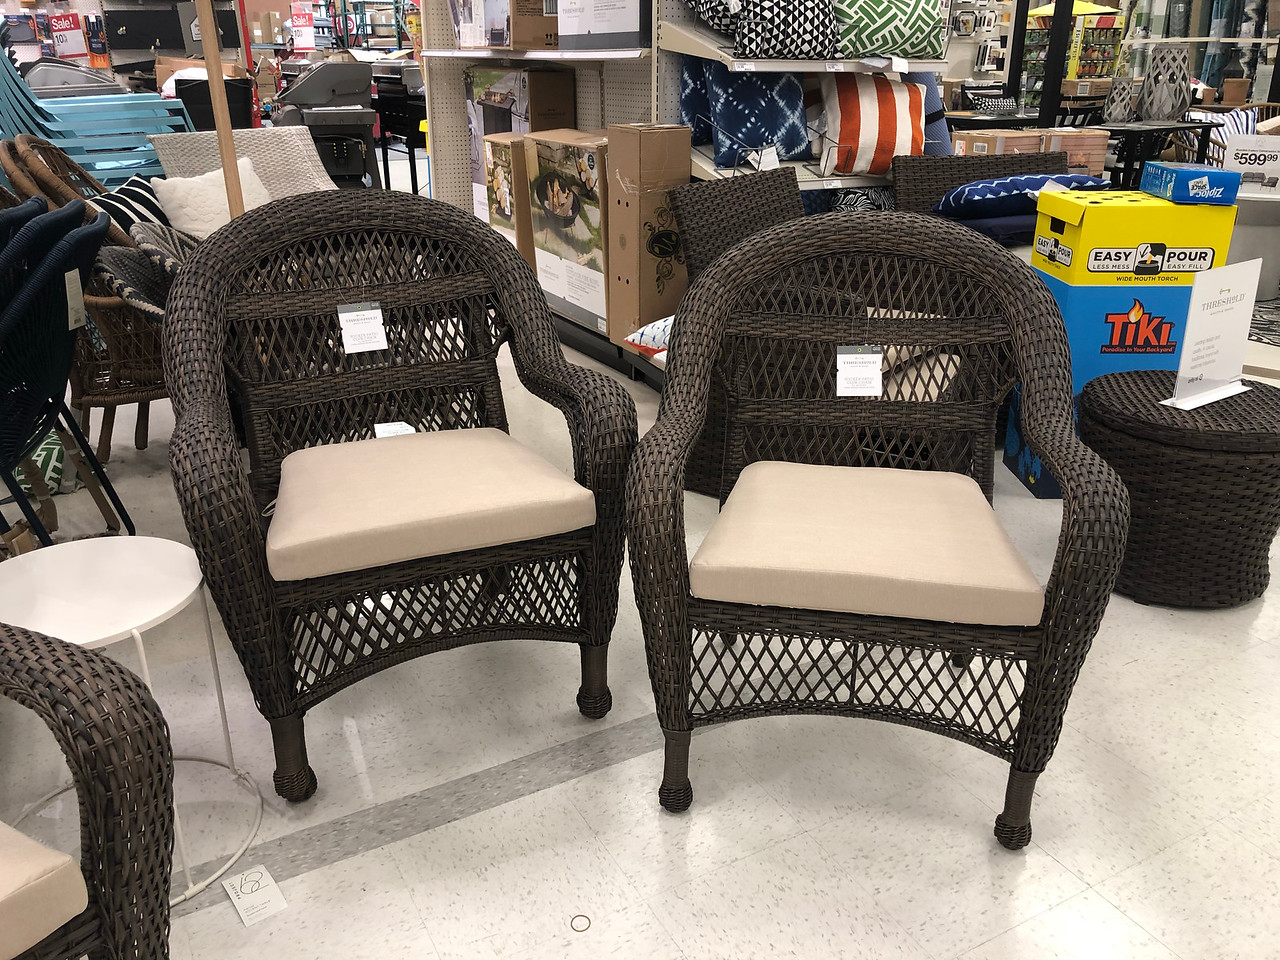 Up to 30% Off Beach & Patio Chairs at Target.com • Hip2Save